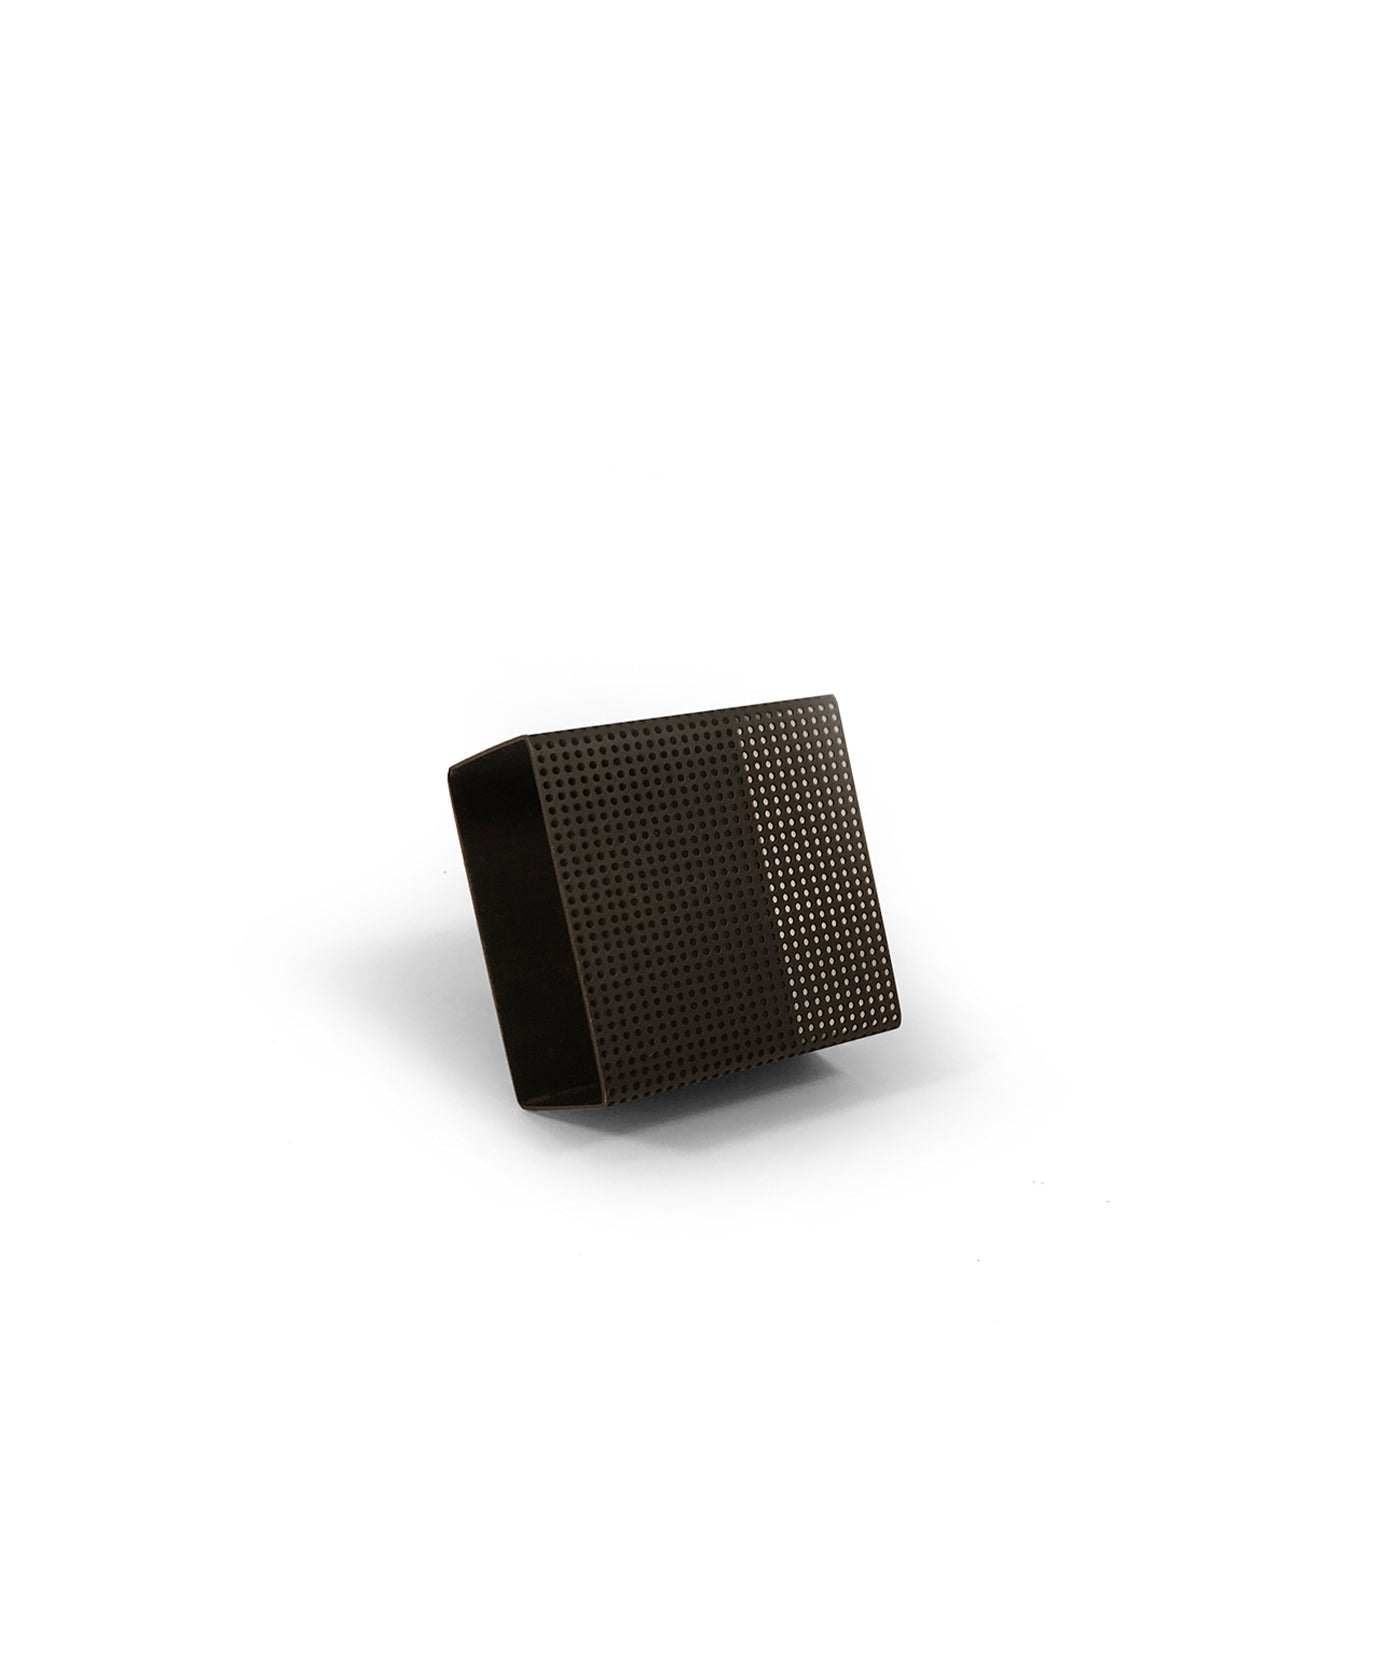 Blackened Brass Perforated Rectangle